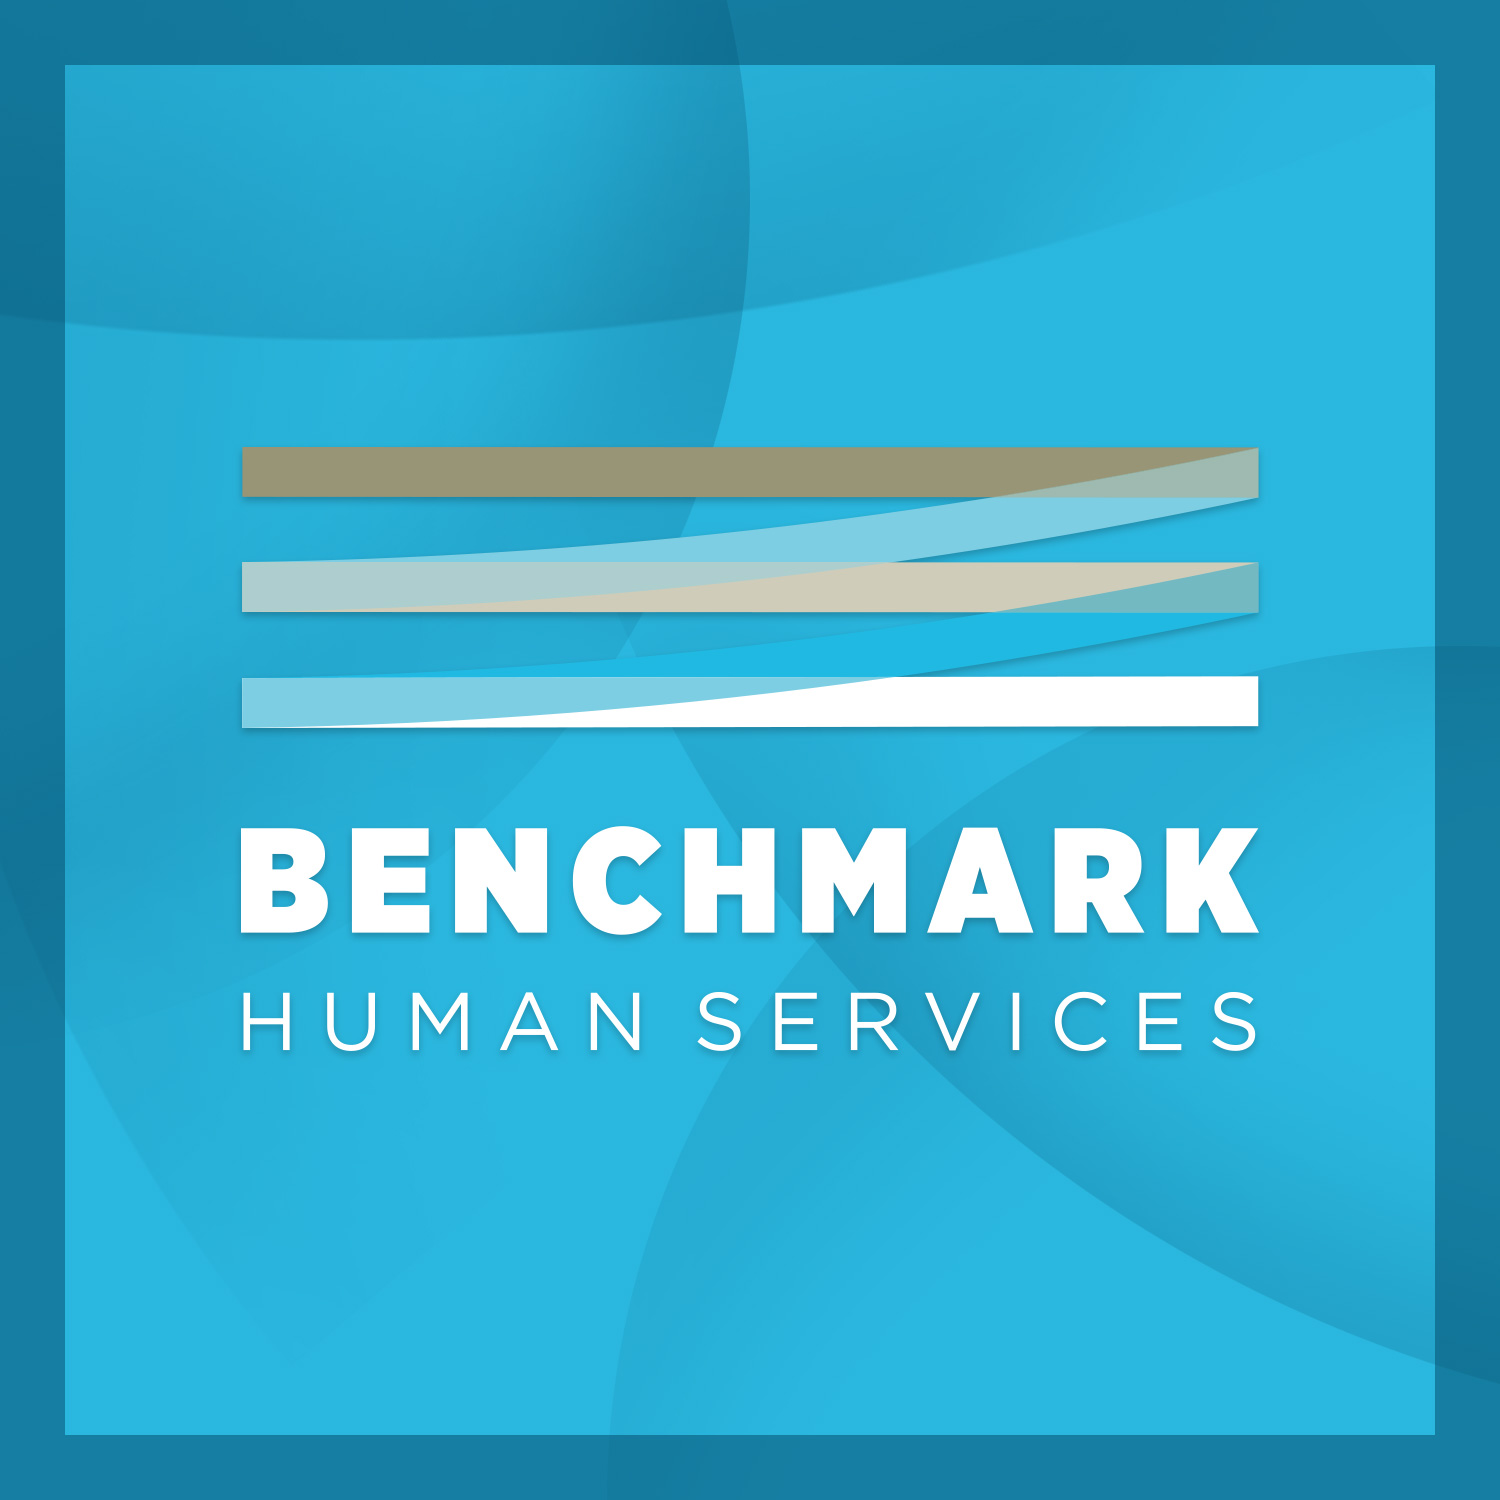 Benchmark Human Services Continues Growth Trajectory with Expansion of Business Development Team